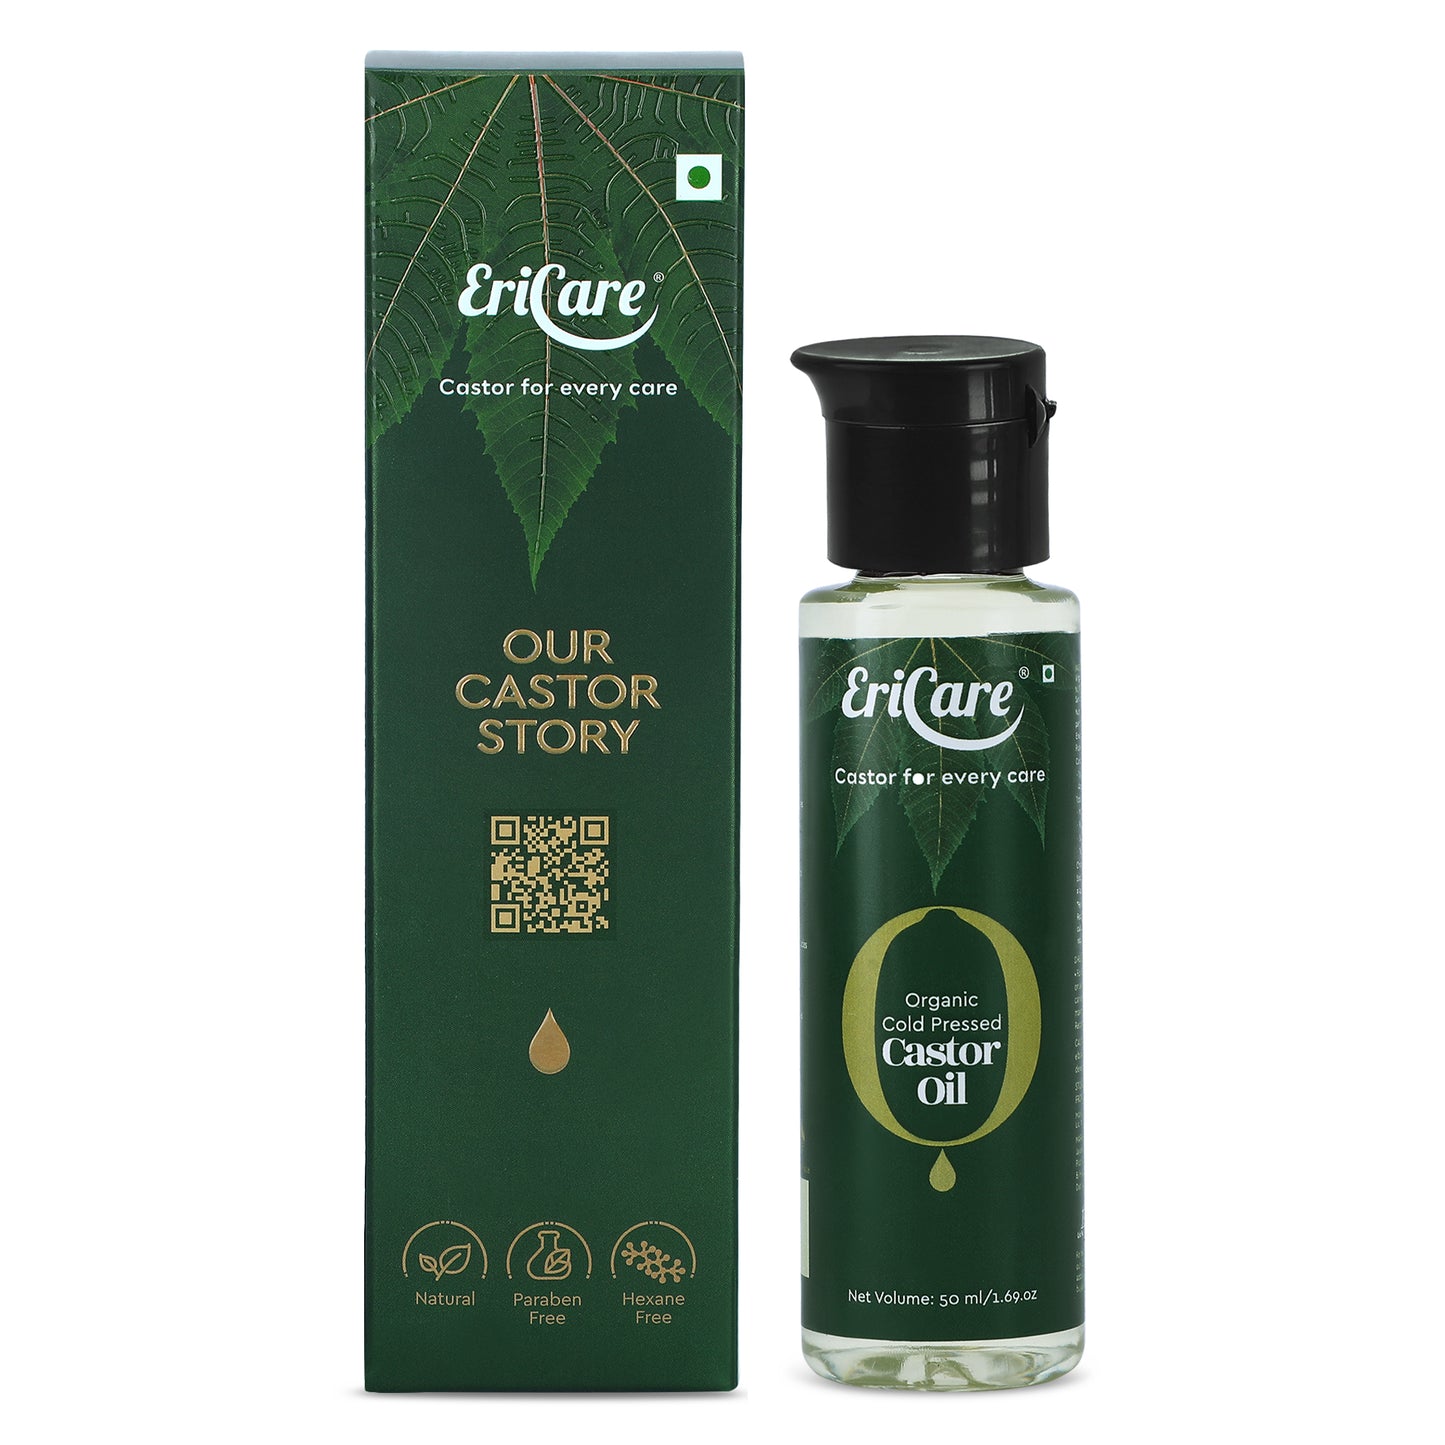 Product photo featuring QR code for accessing the 'About Us' page of Ericare organic castor oil brand